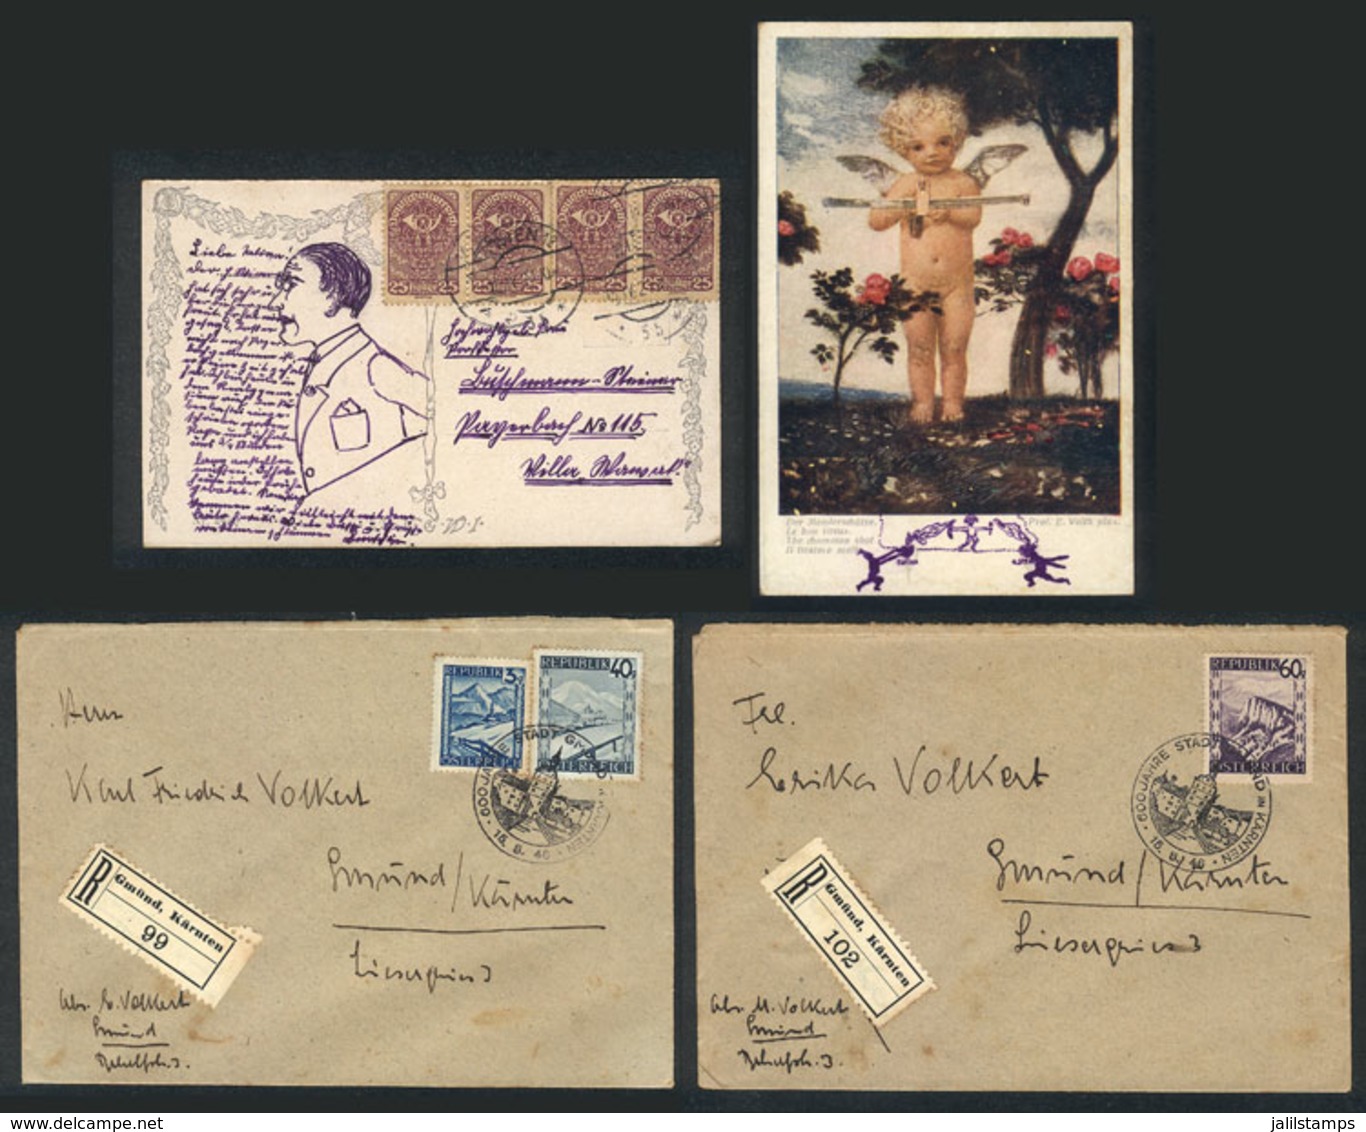 AUSTRIA: Postcard Used In 1921 + 2 Covers With Special Postmarks Of 1946, Very Nice. - Covers & Documents